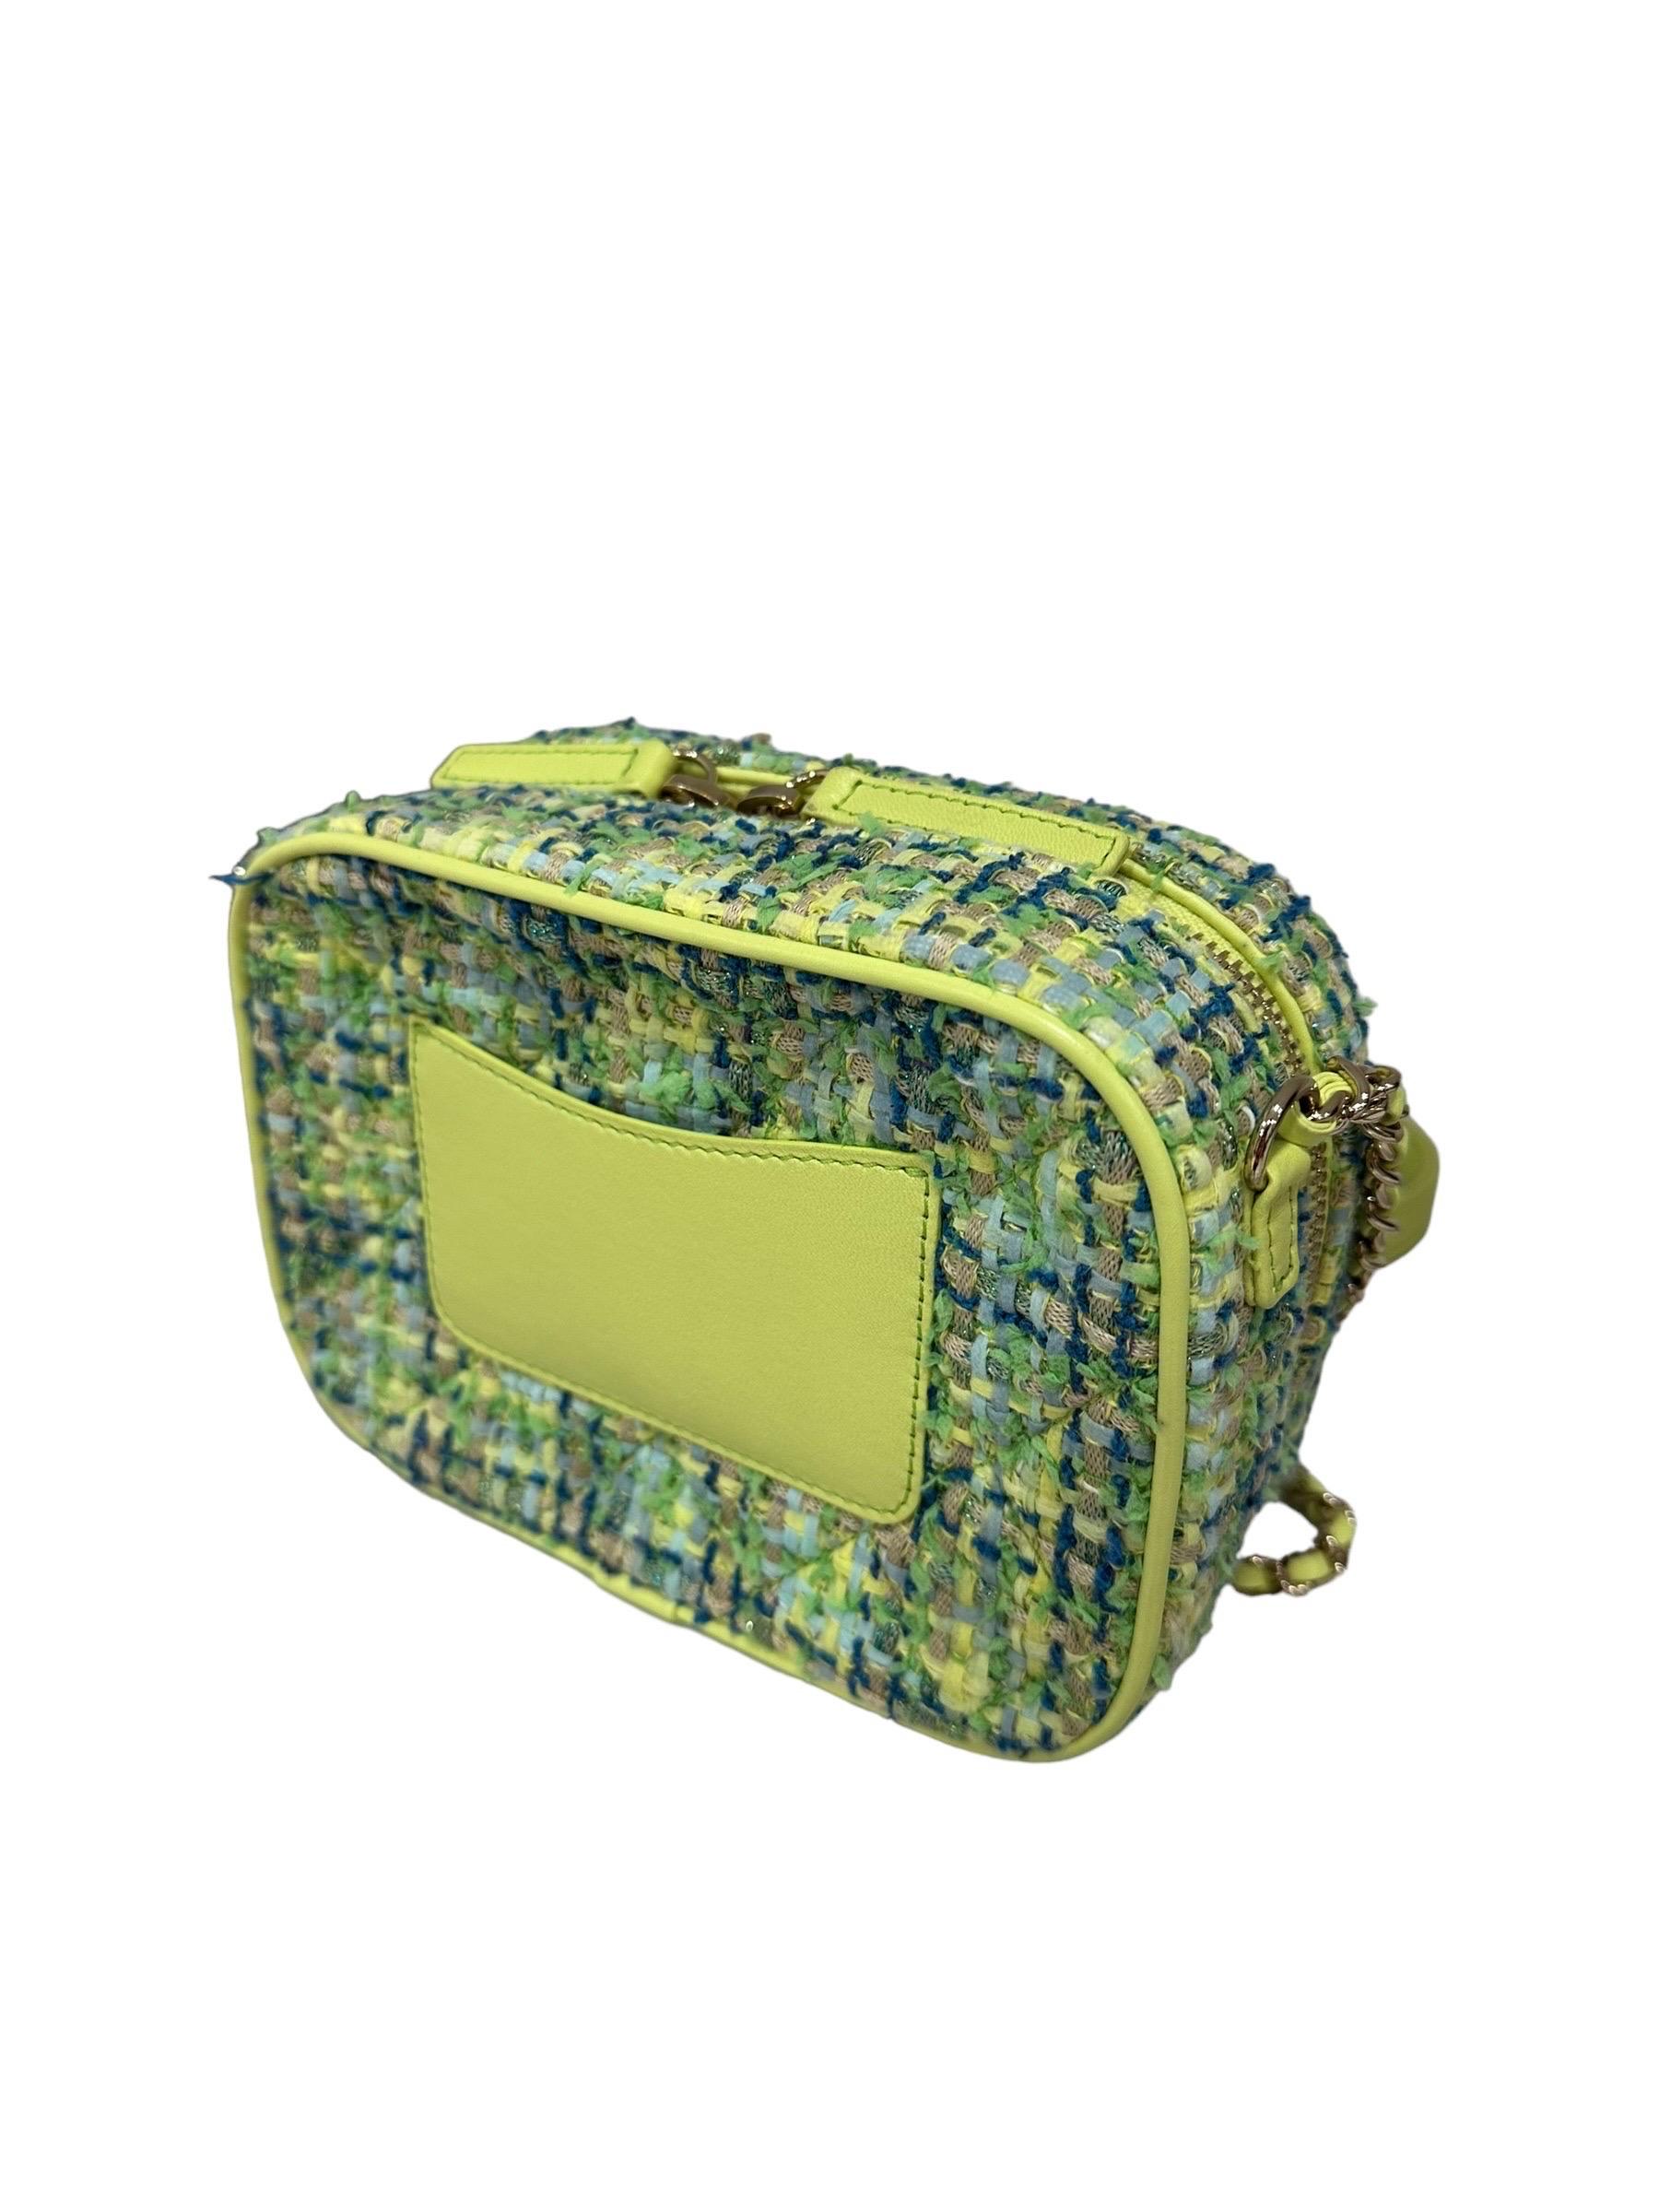 Borsa A Tracolla Chanel Camera Bag Tweed Lime 2019 For Sale 5